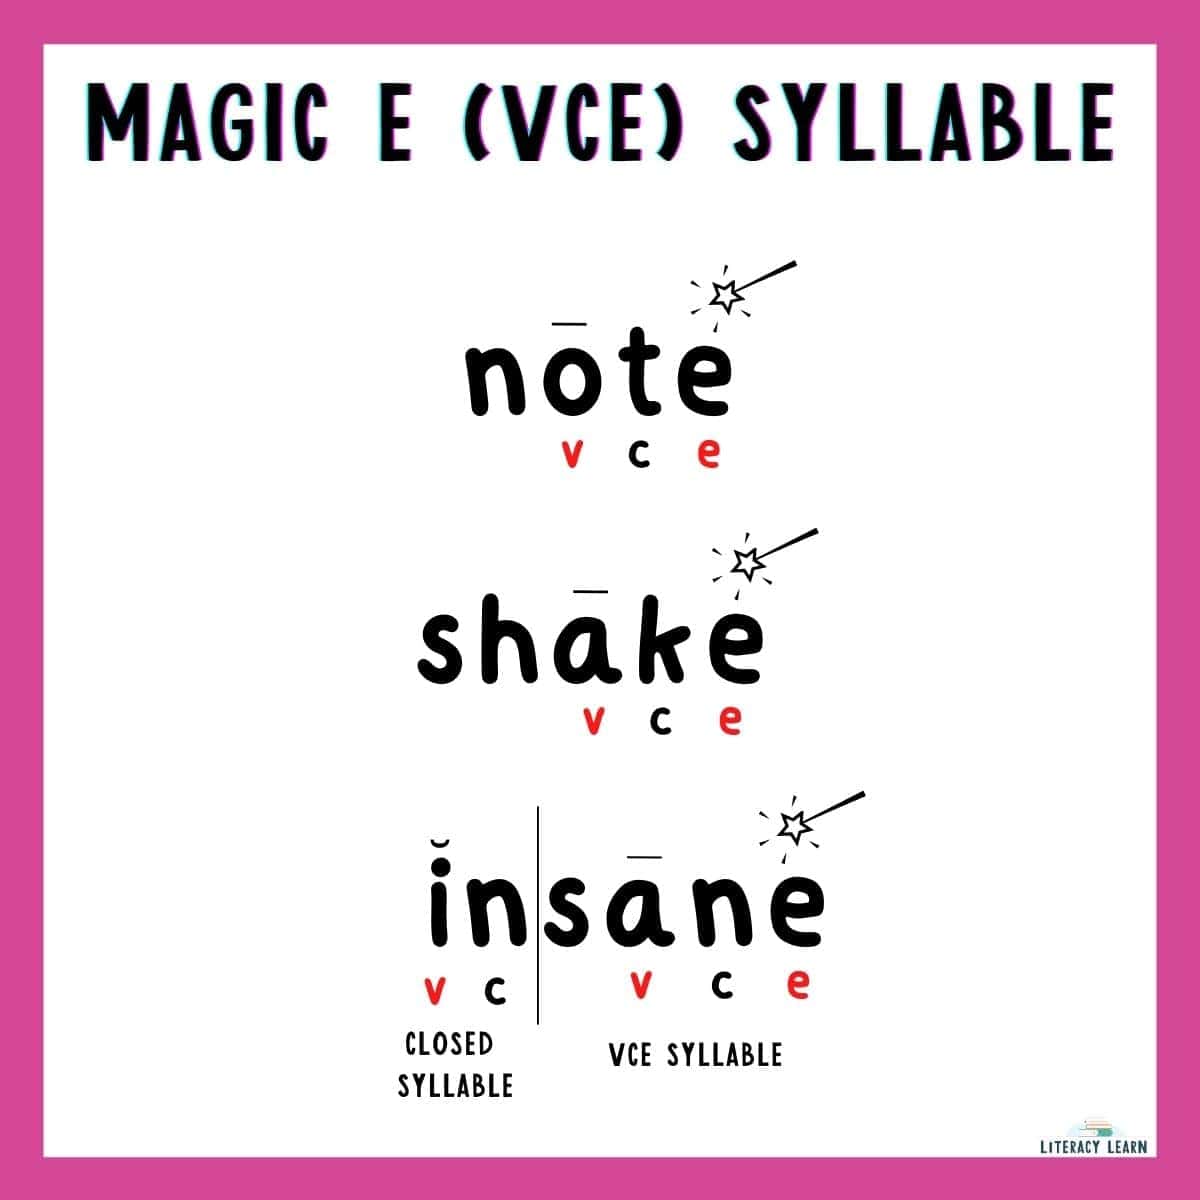 A pink graphic entitled "Magic E (VCe) Syllables with three magic e words words and examples included.